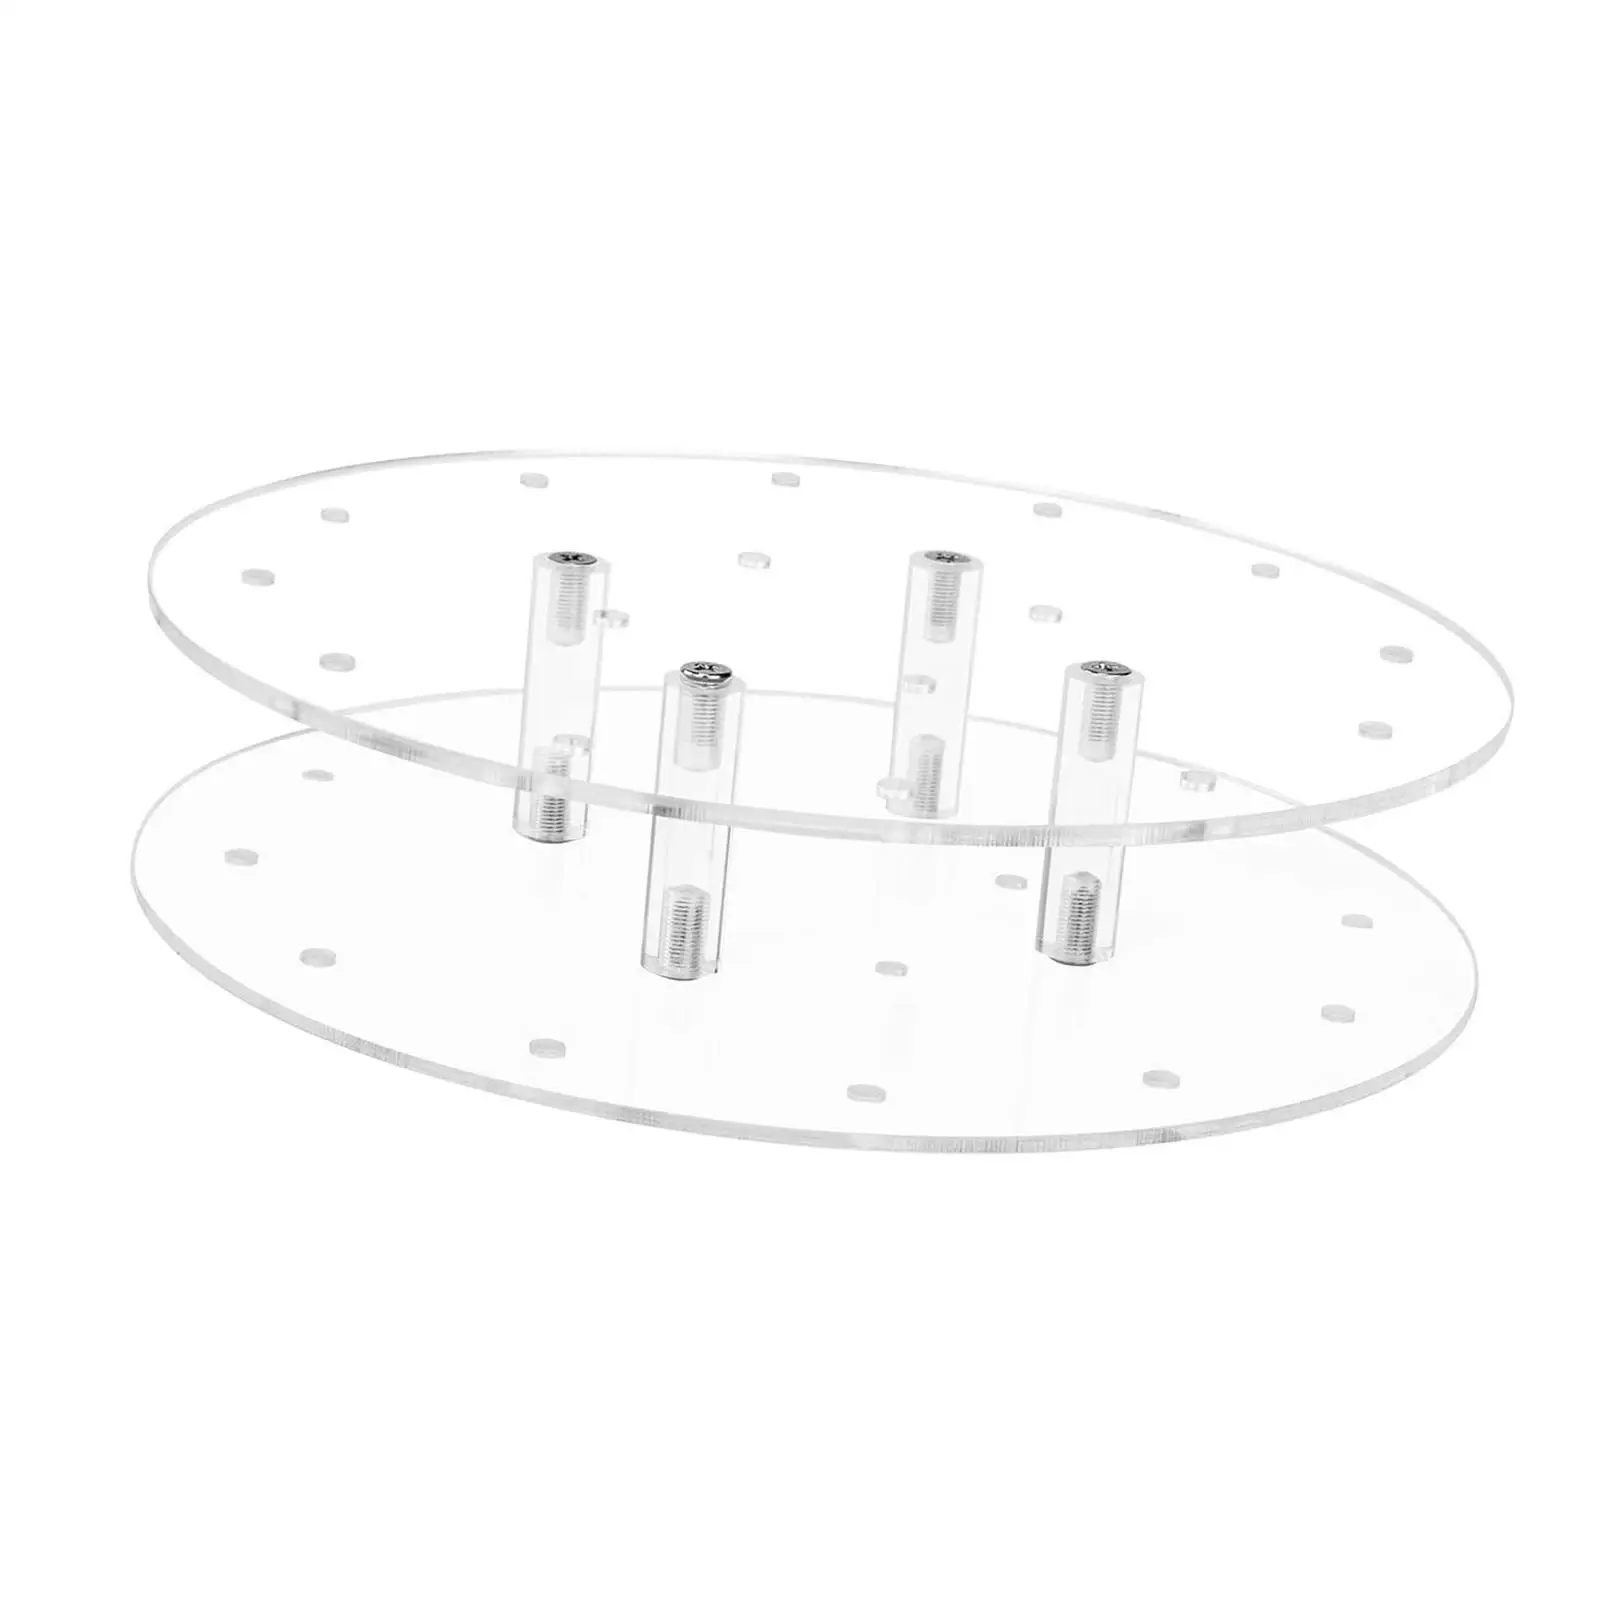 16 Holes Cake Holder, Acrylic Cake Display Stand, Transparent Round Candy Holder for Thanksgiving